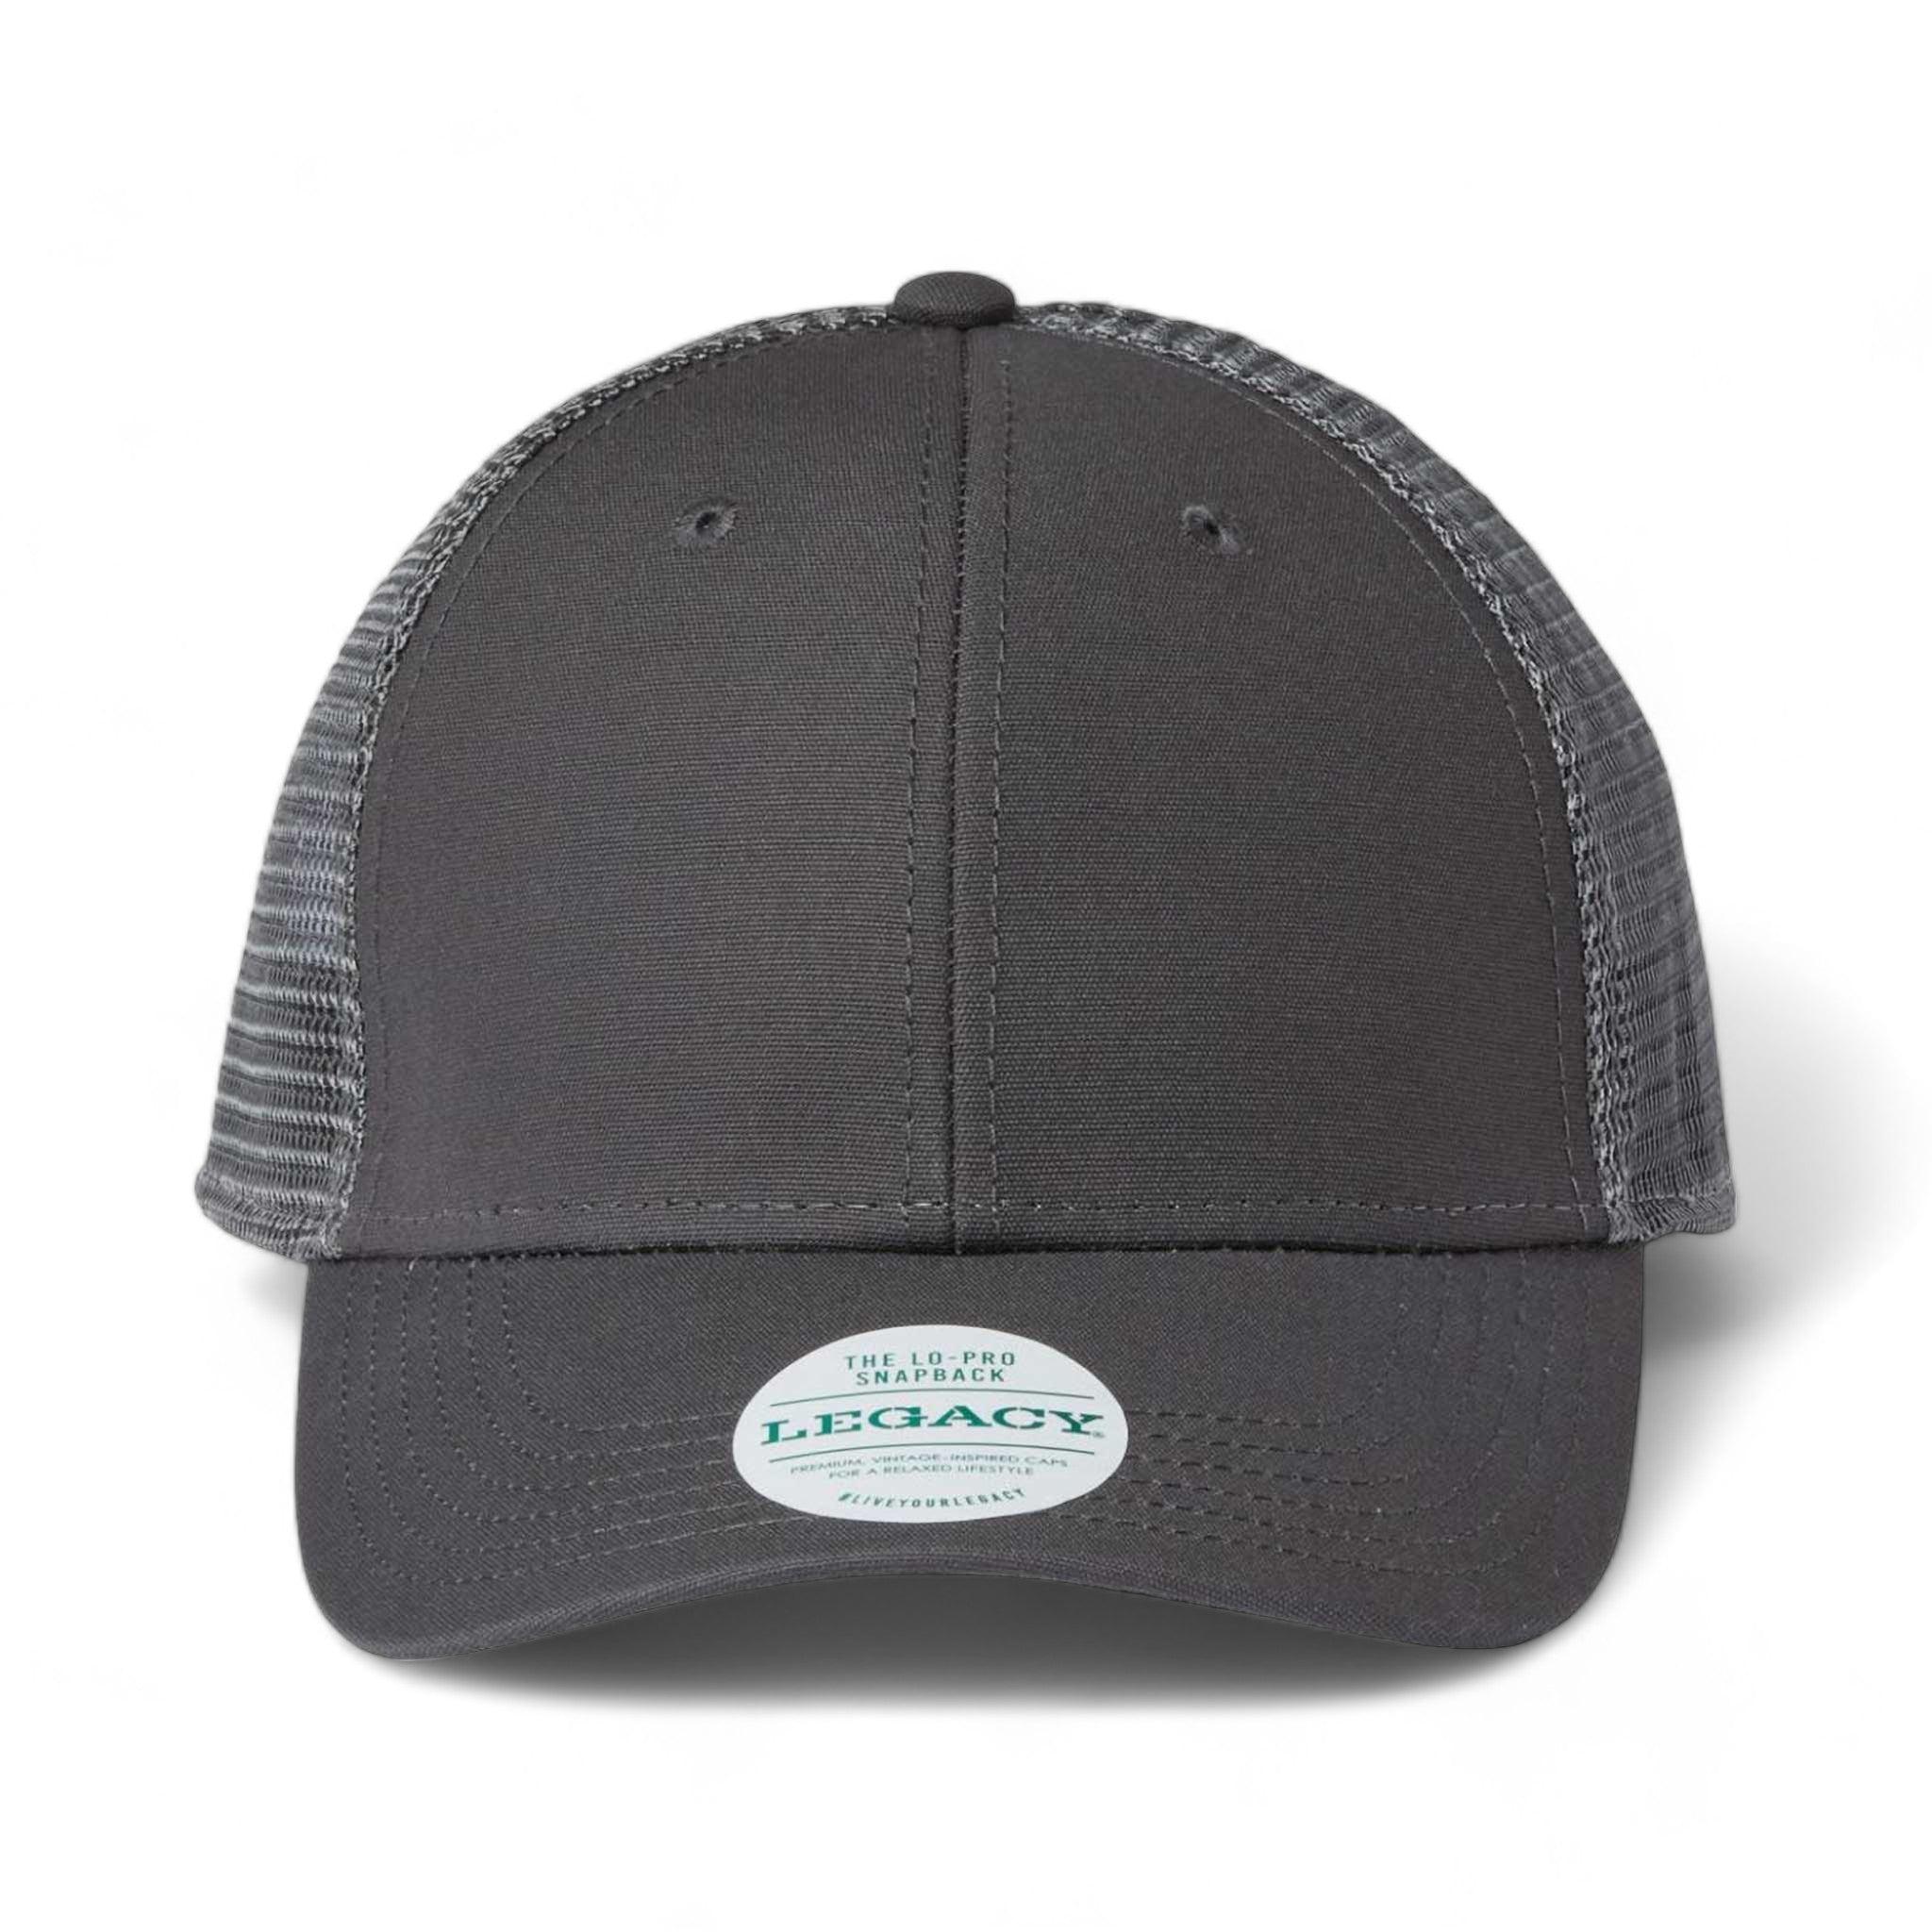 Front view of LEGACY LPS custom hat in dark grey and dark grey